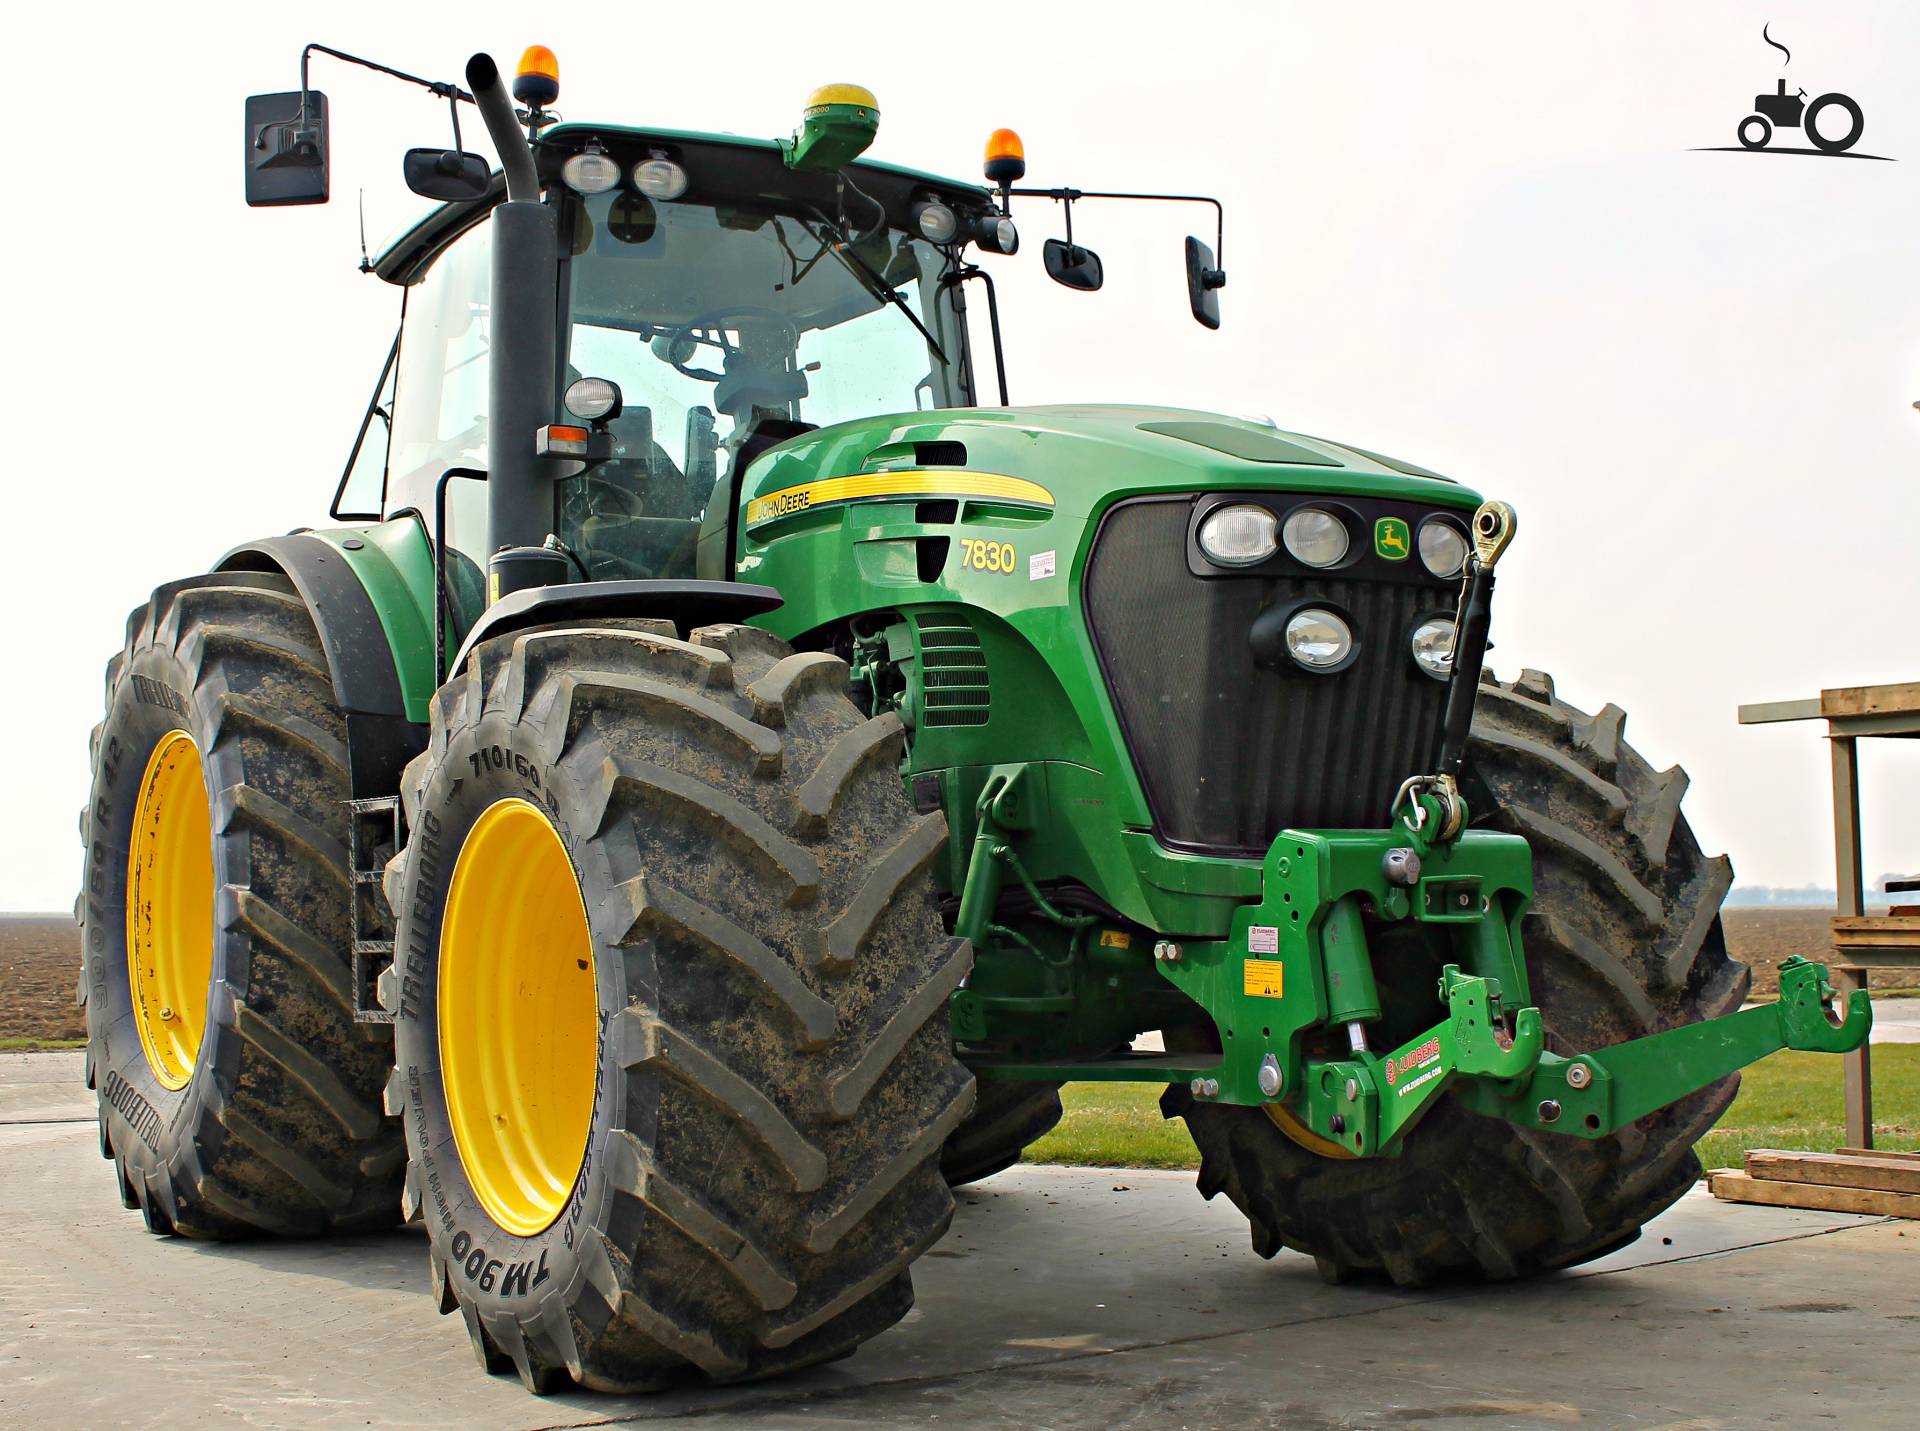 John Deere 7830 Specs and data - Everything about the John Deere 7830